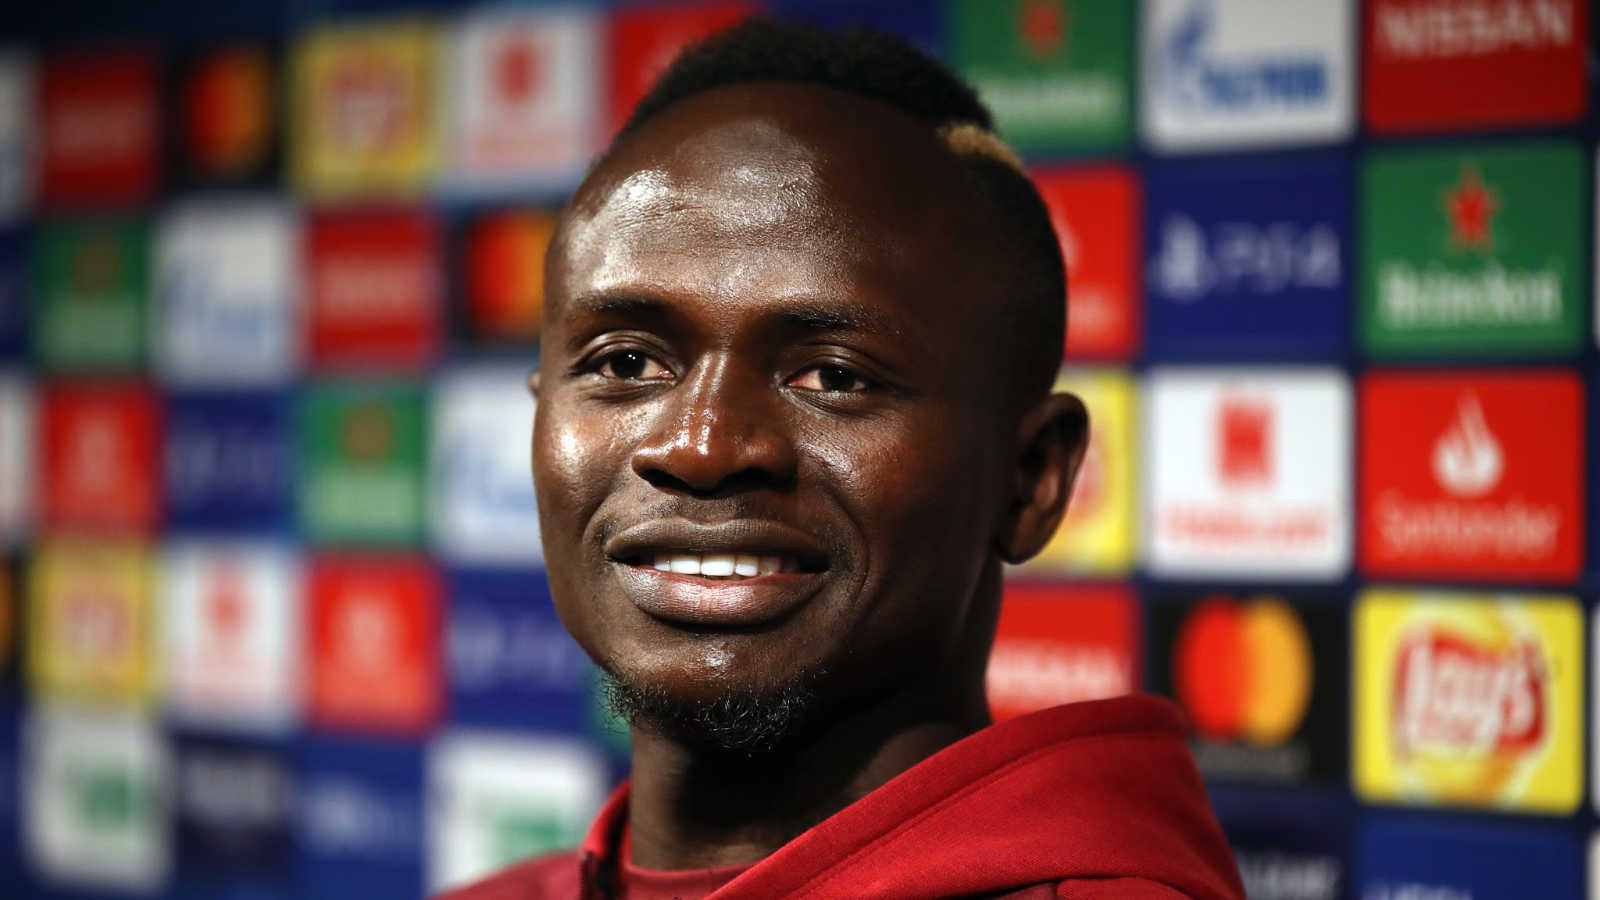 Sadio Mane hailed for what he did right after Liverpool scored against Manchester United